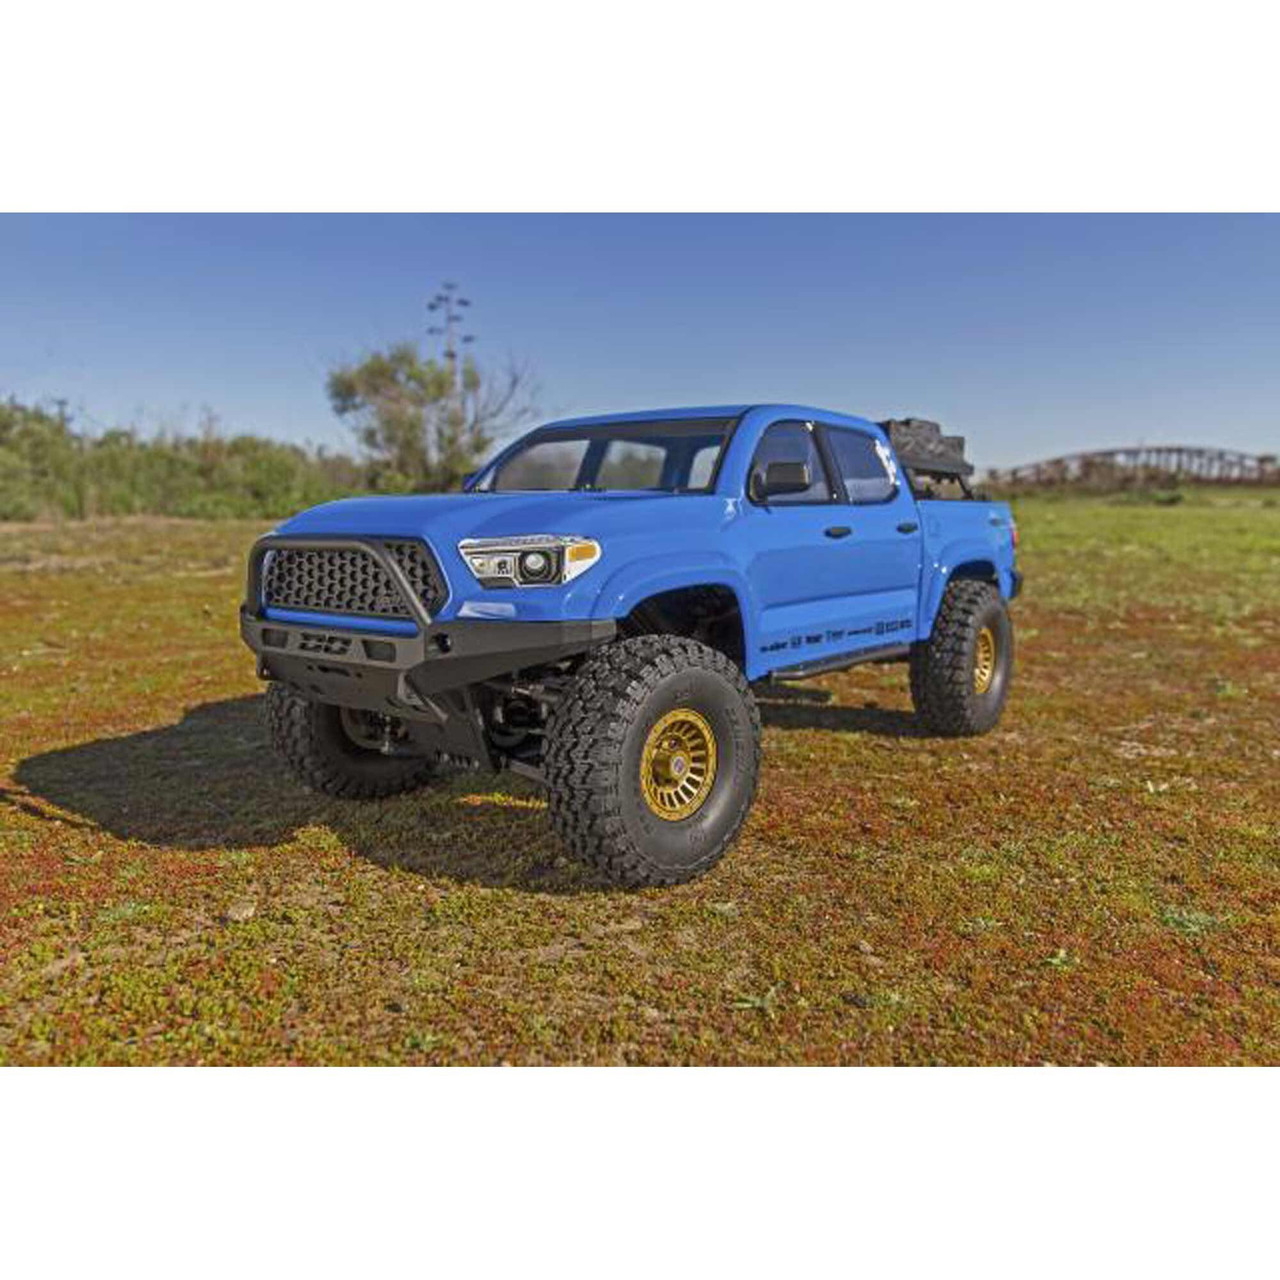 Element RC Enduro Knightrunner 4x4 RTR 1/10 Rock Crawler Combo (Blue) w/2.4GHz Radio, Battery & Charger